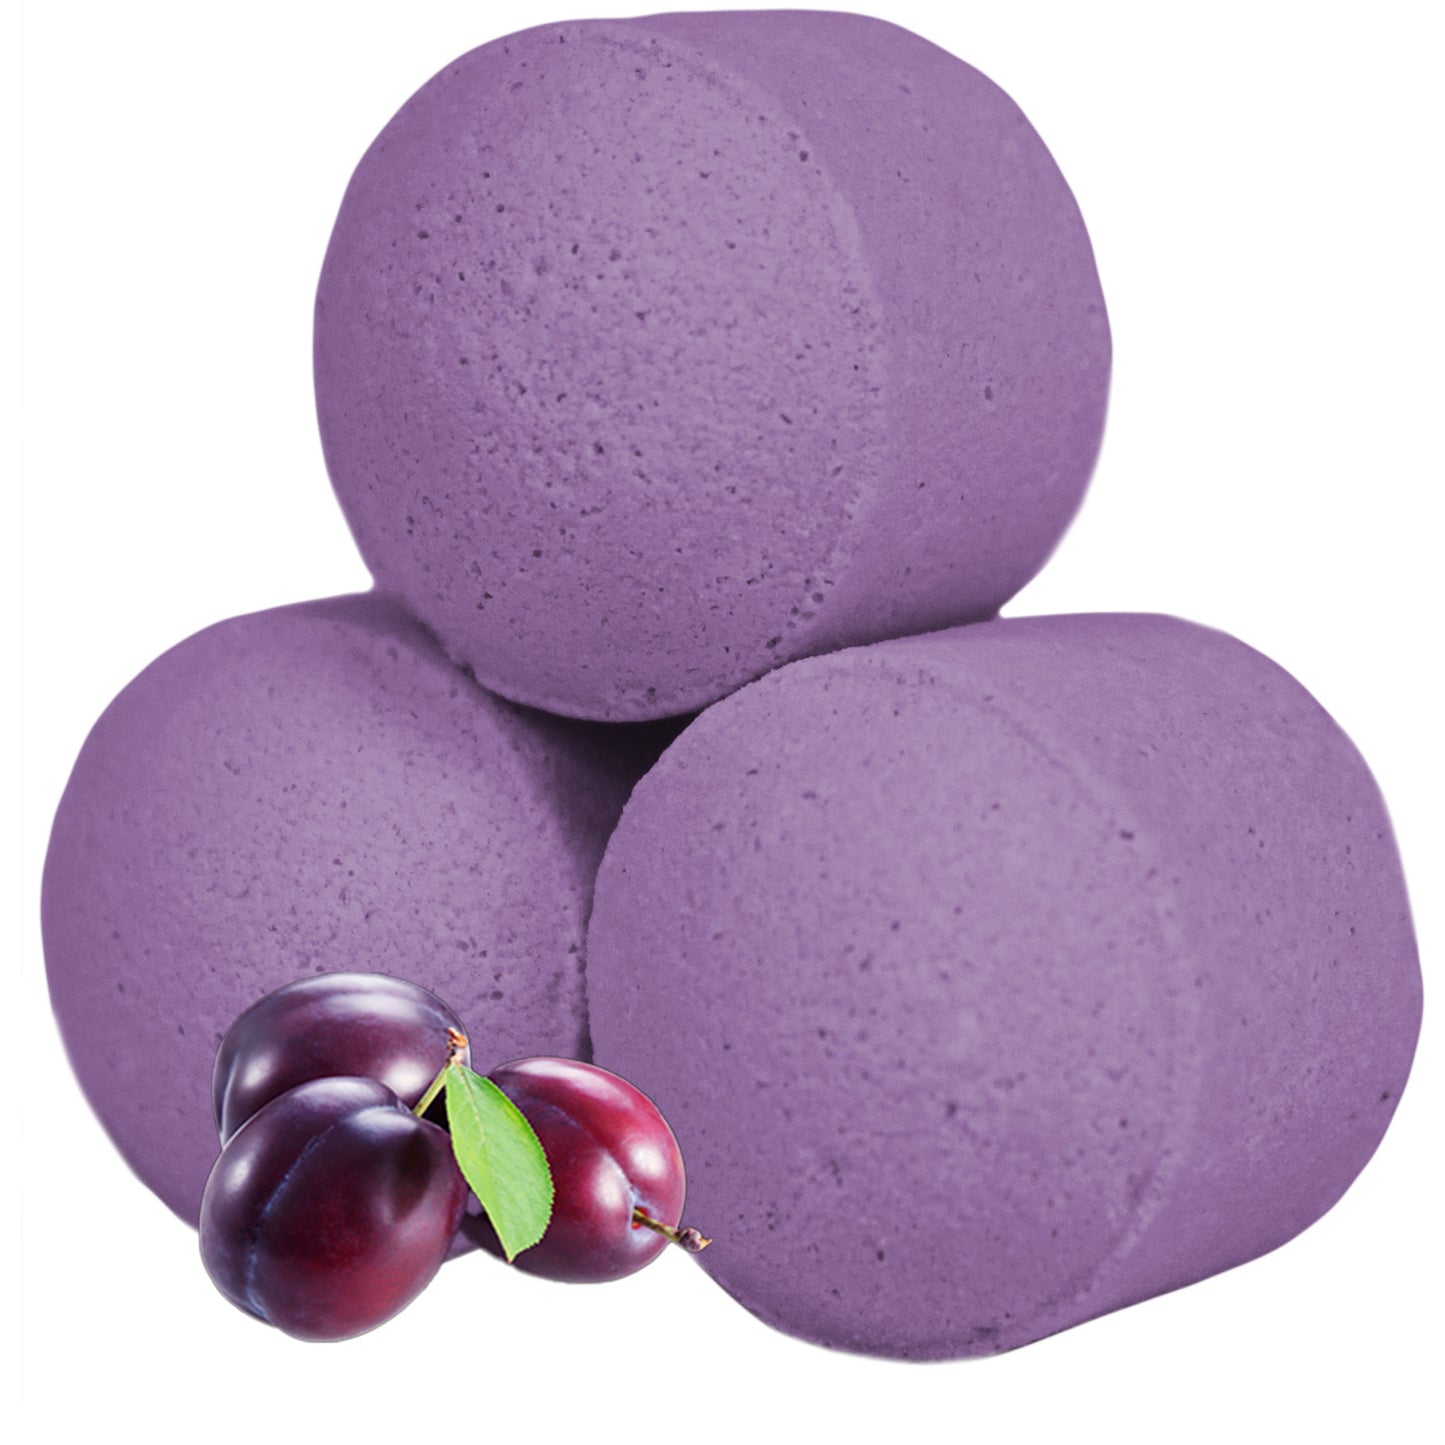 1.3Kg Box of Chill Pills - Frosted Sugar Plum - ScentiMelti Wax Melts